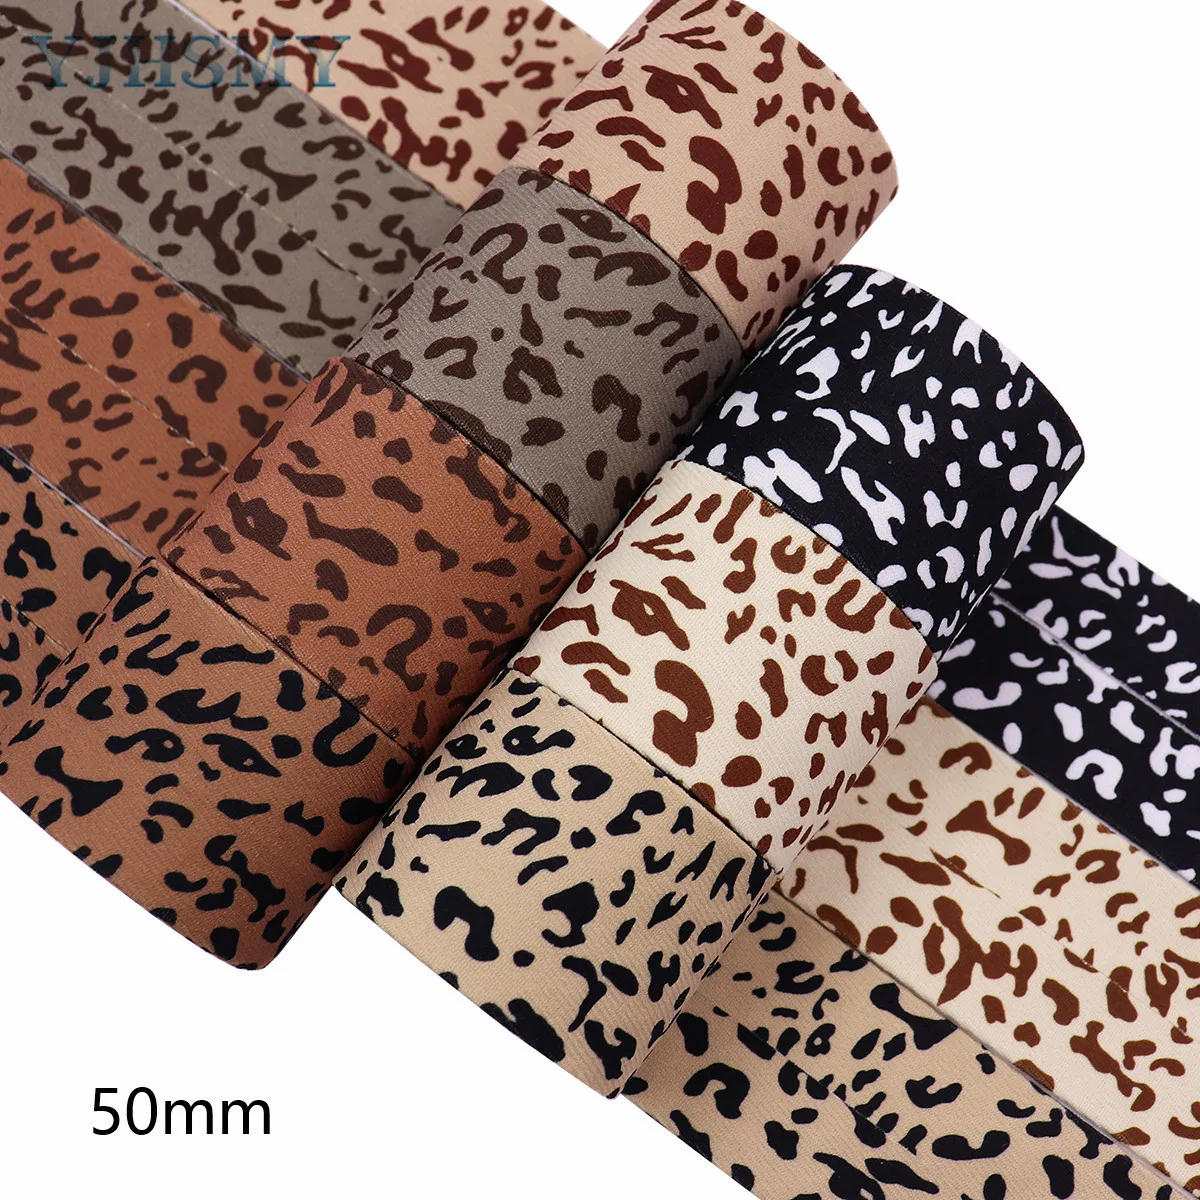 

Double Face Fabric Ribbons 5 Yards Leopard Ribbon for Gift Package Wrapping,Floral Design,Hair Bow Clip Making,Crafting,Sewing